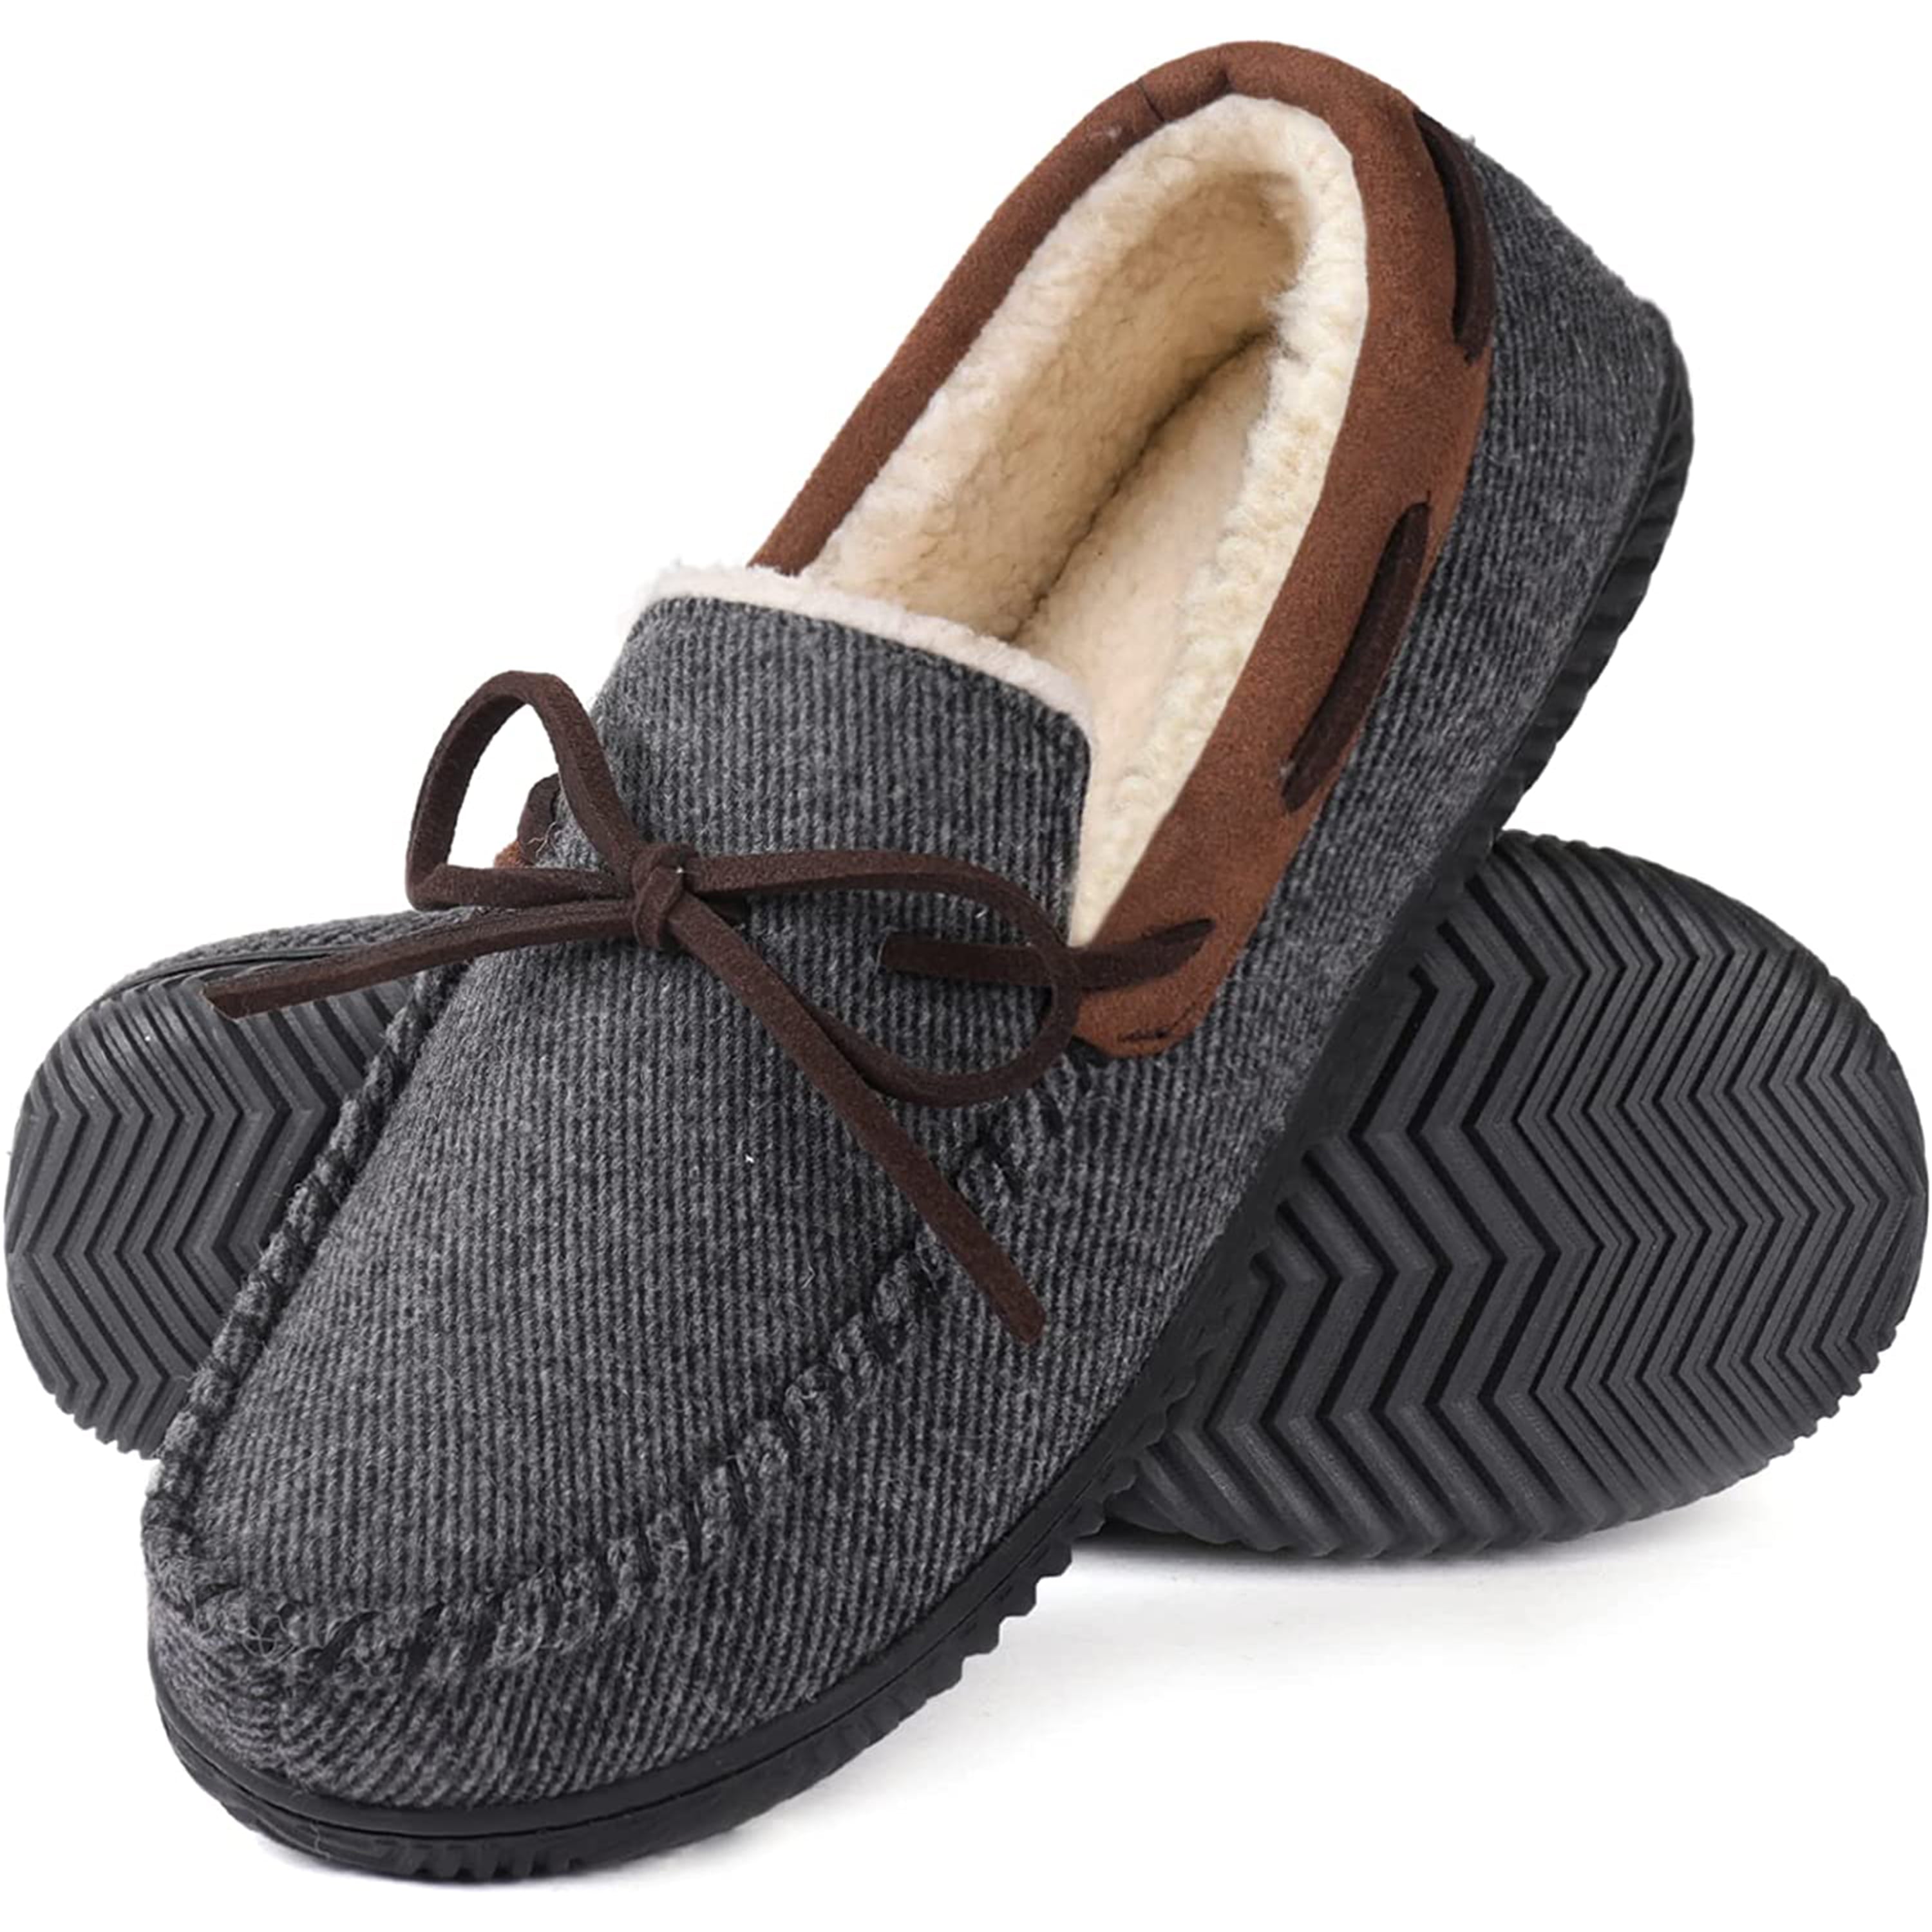 Zoned - Iman Mens Slippers by Banana Peel, Made in Philippines-saigonsouth.com.vn